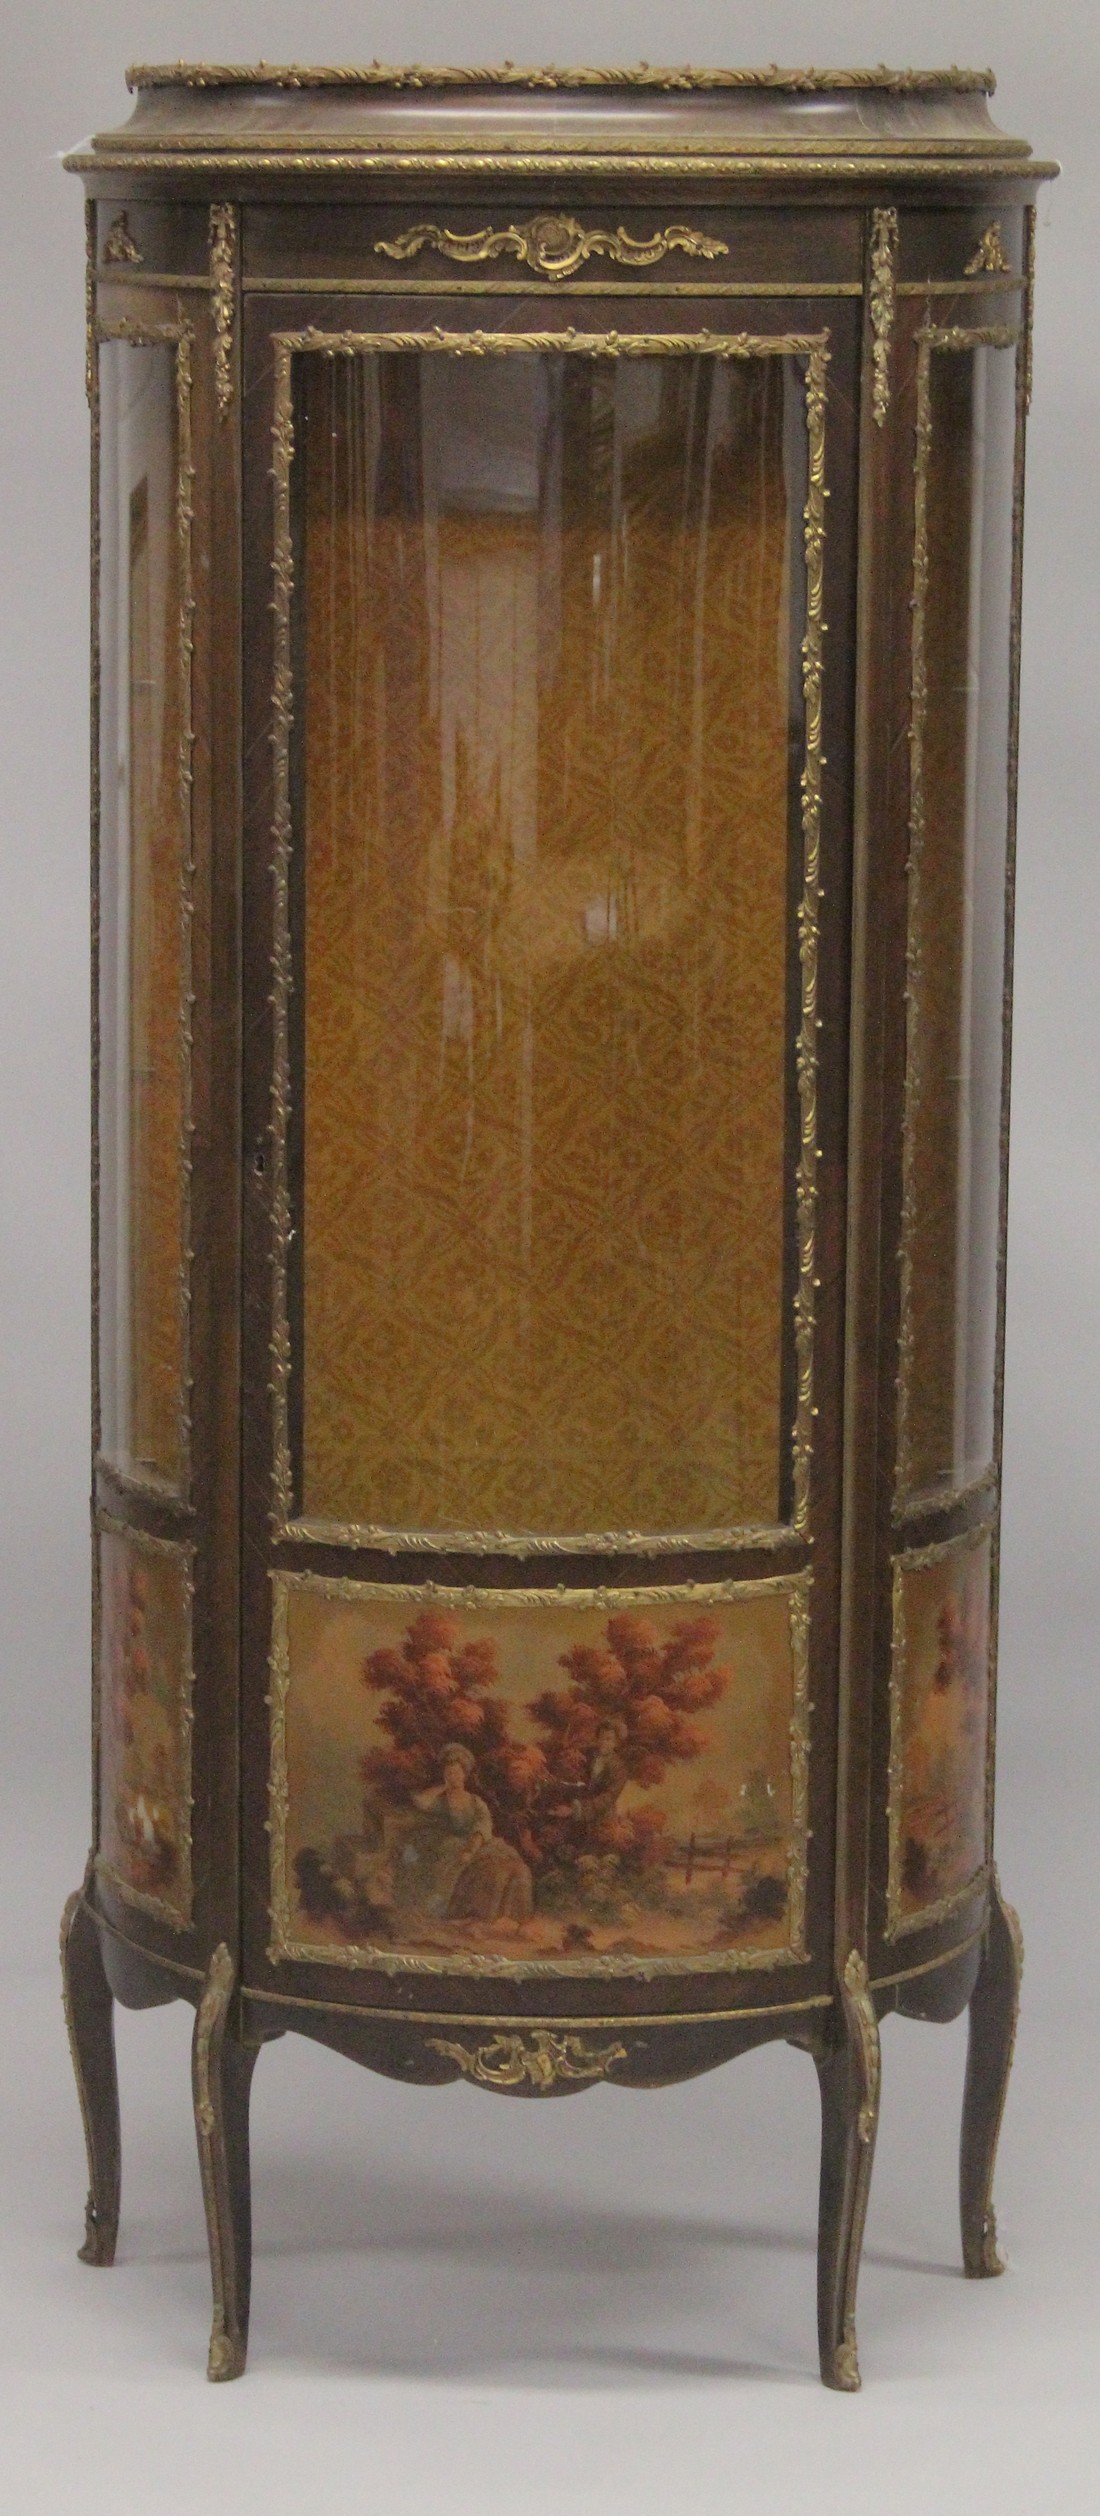 A VERNIS MARTIN VITRINE with three quarter panel doors on curving legs. 5ft 9ins high, 2ft 4ins